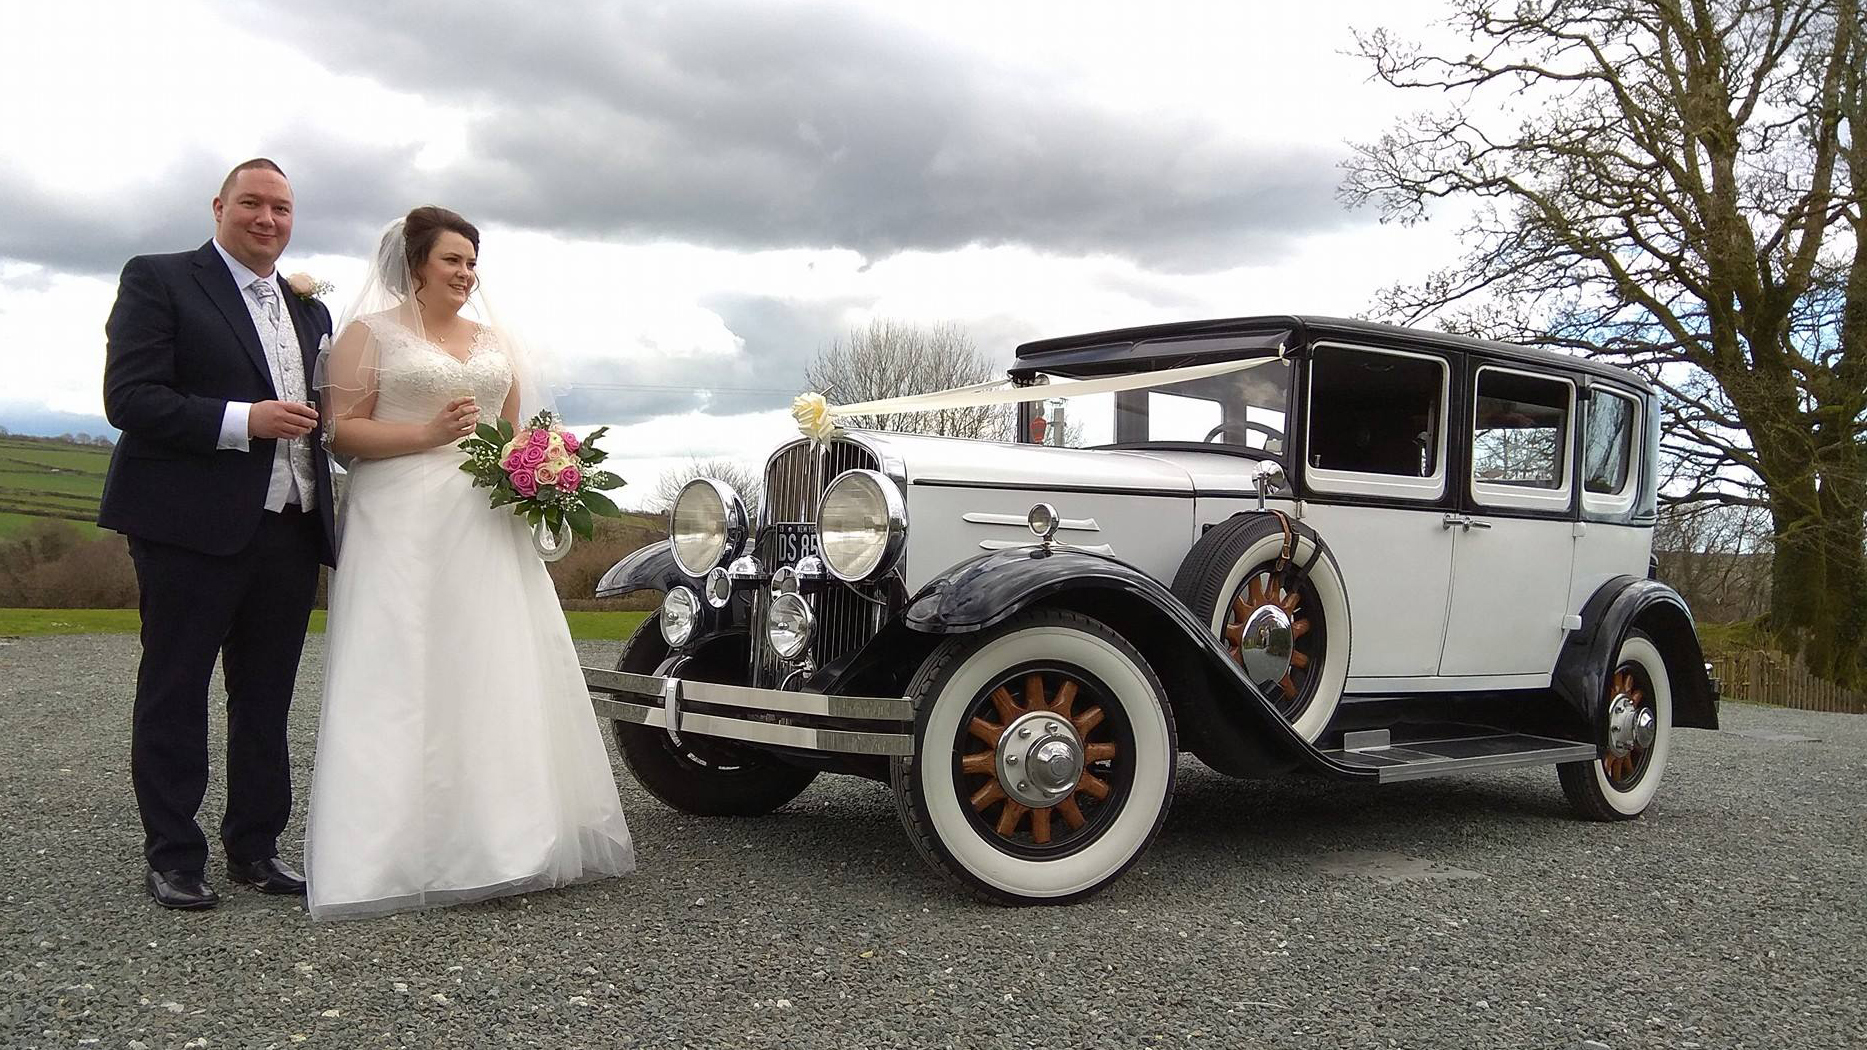 Bride and Groom in front of Vintage Wedding Car decoraqted with ivory ribbons